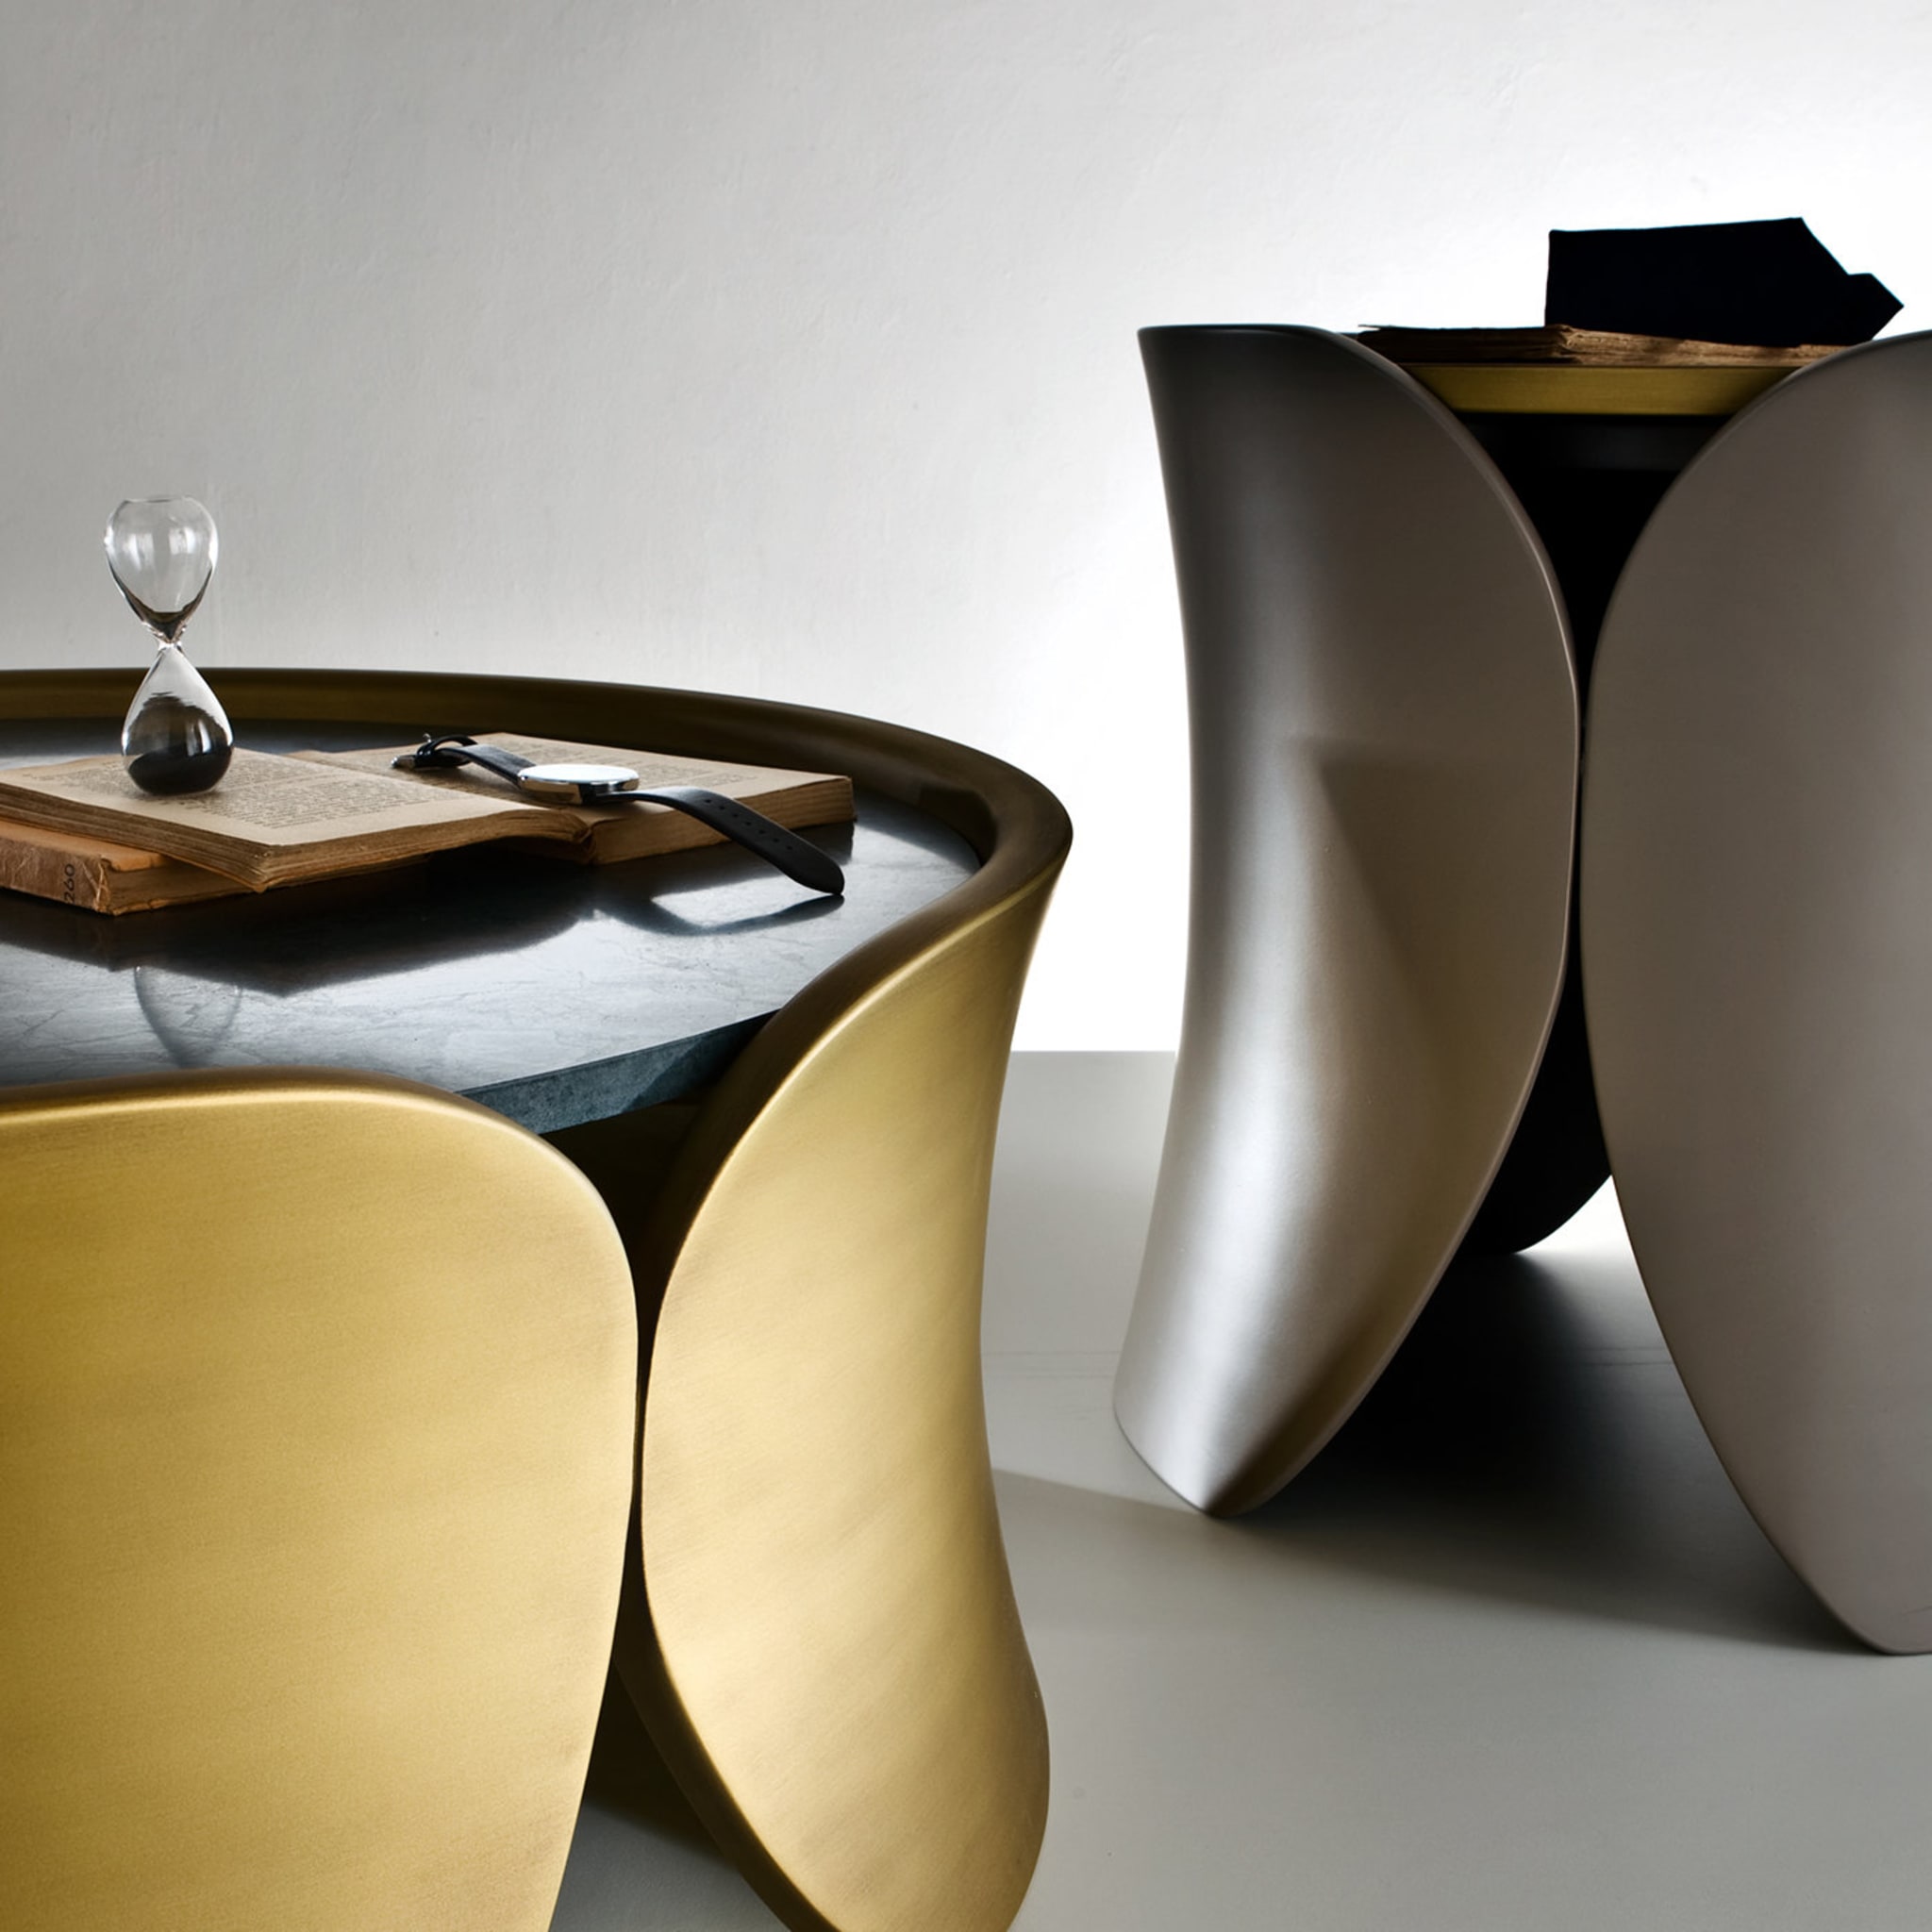 Hug Side Table by Cesare Arosio - Alternative view 3